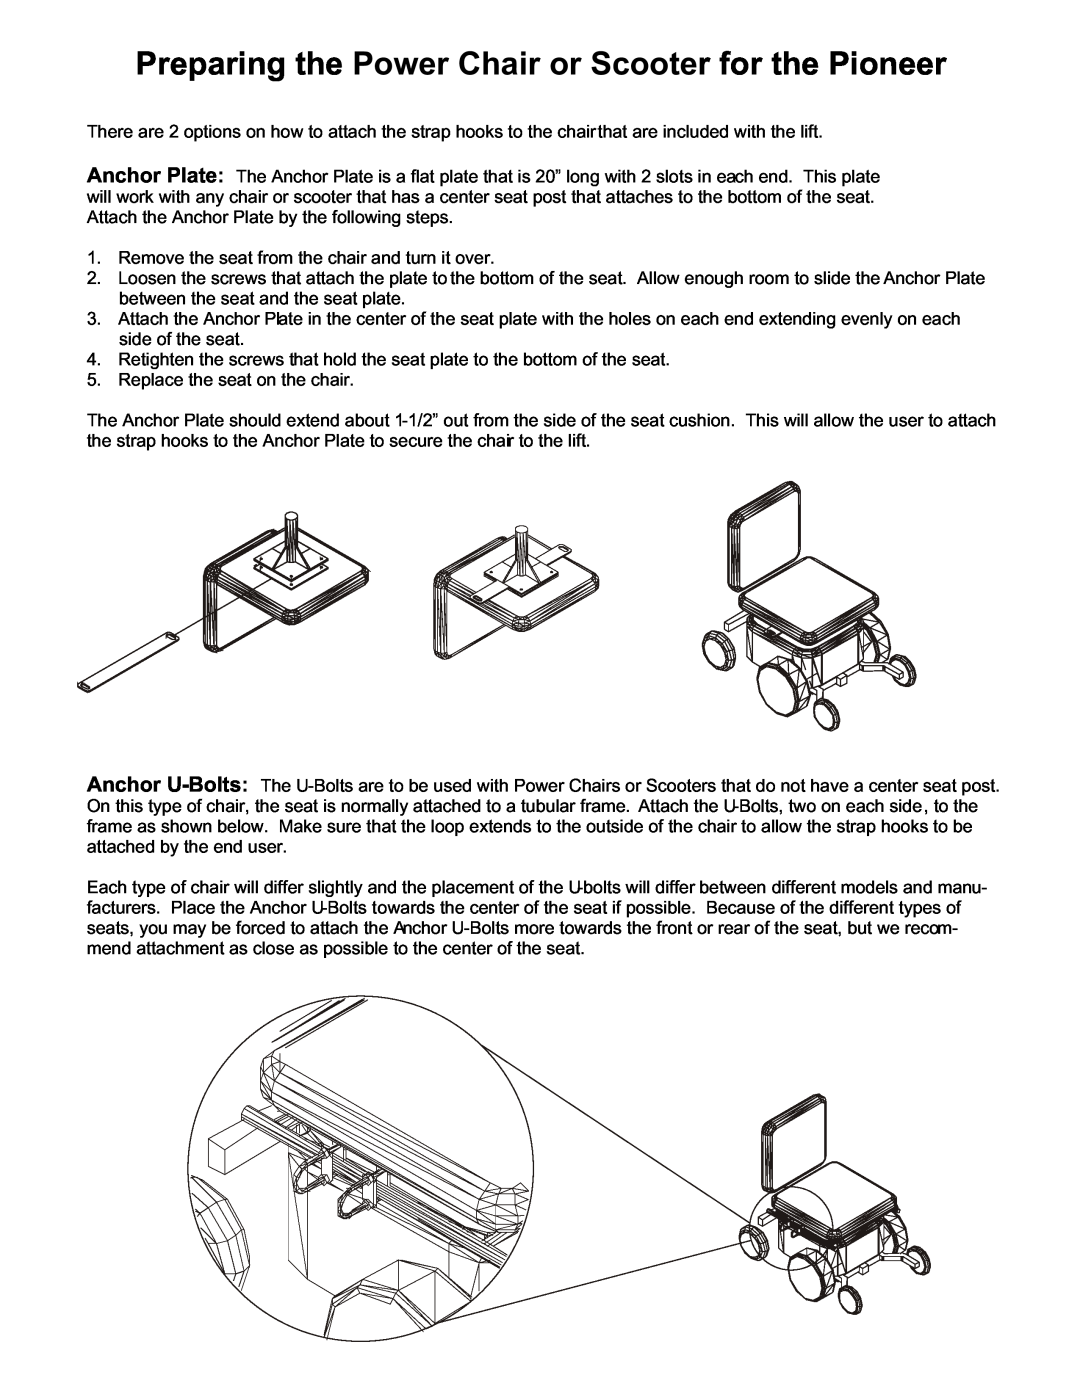 Pioneer AL600 owner manual Preparing the Power Chair or Scooter for the Pioneer 